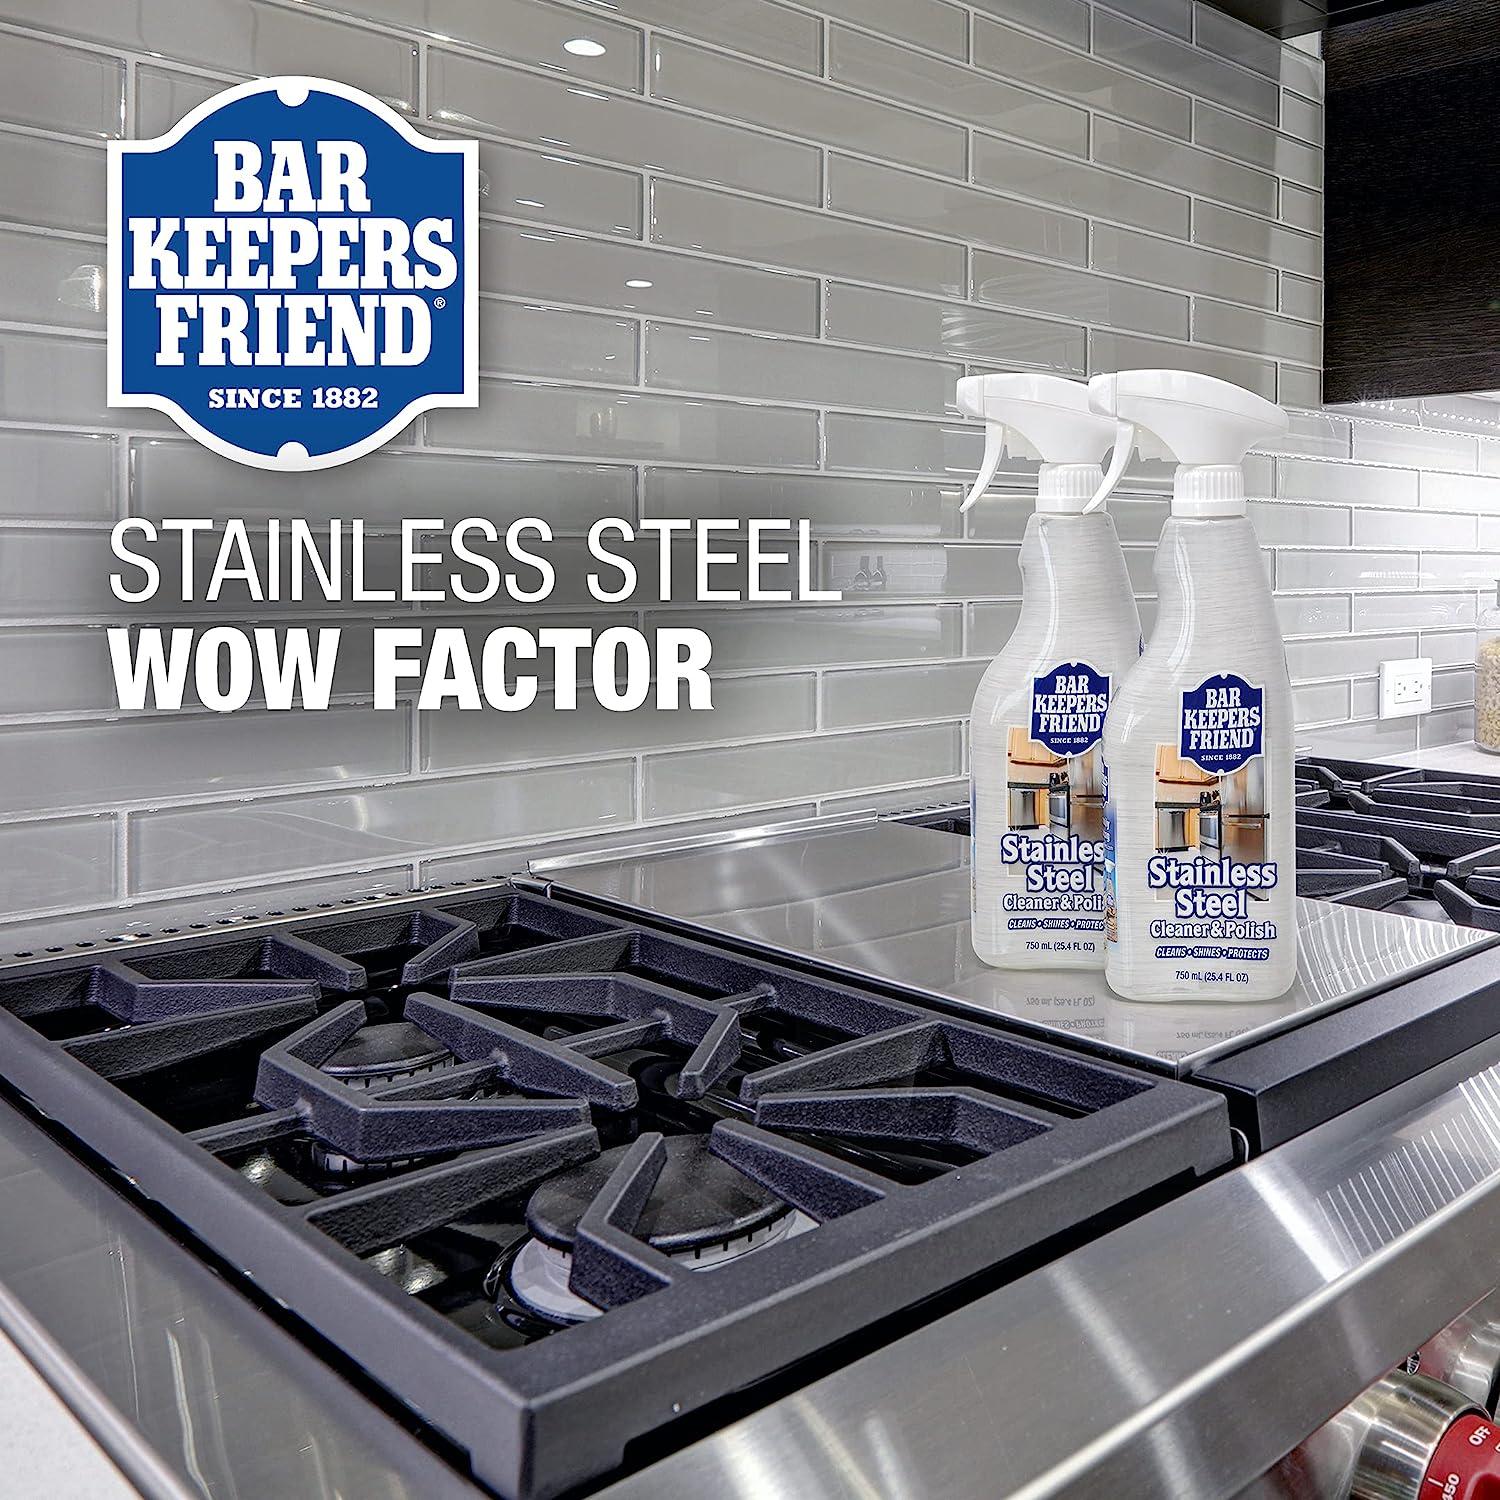 2 Pack) Bar Keepers Friend Soft Cleanser for Stainless Steel